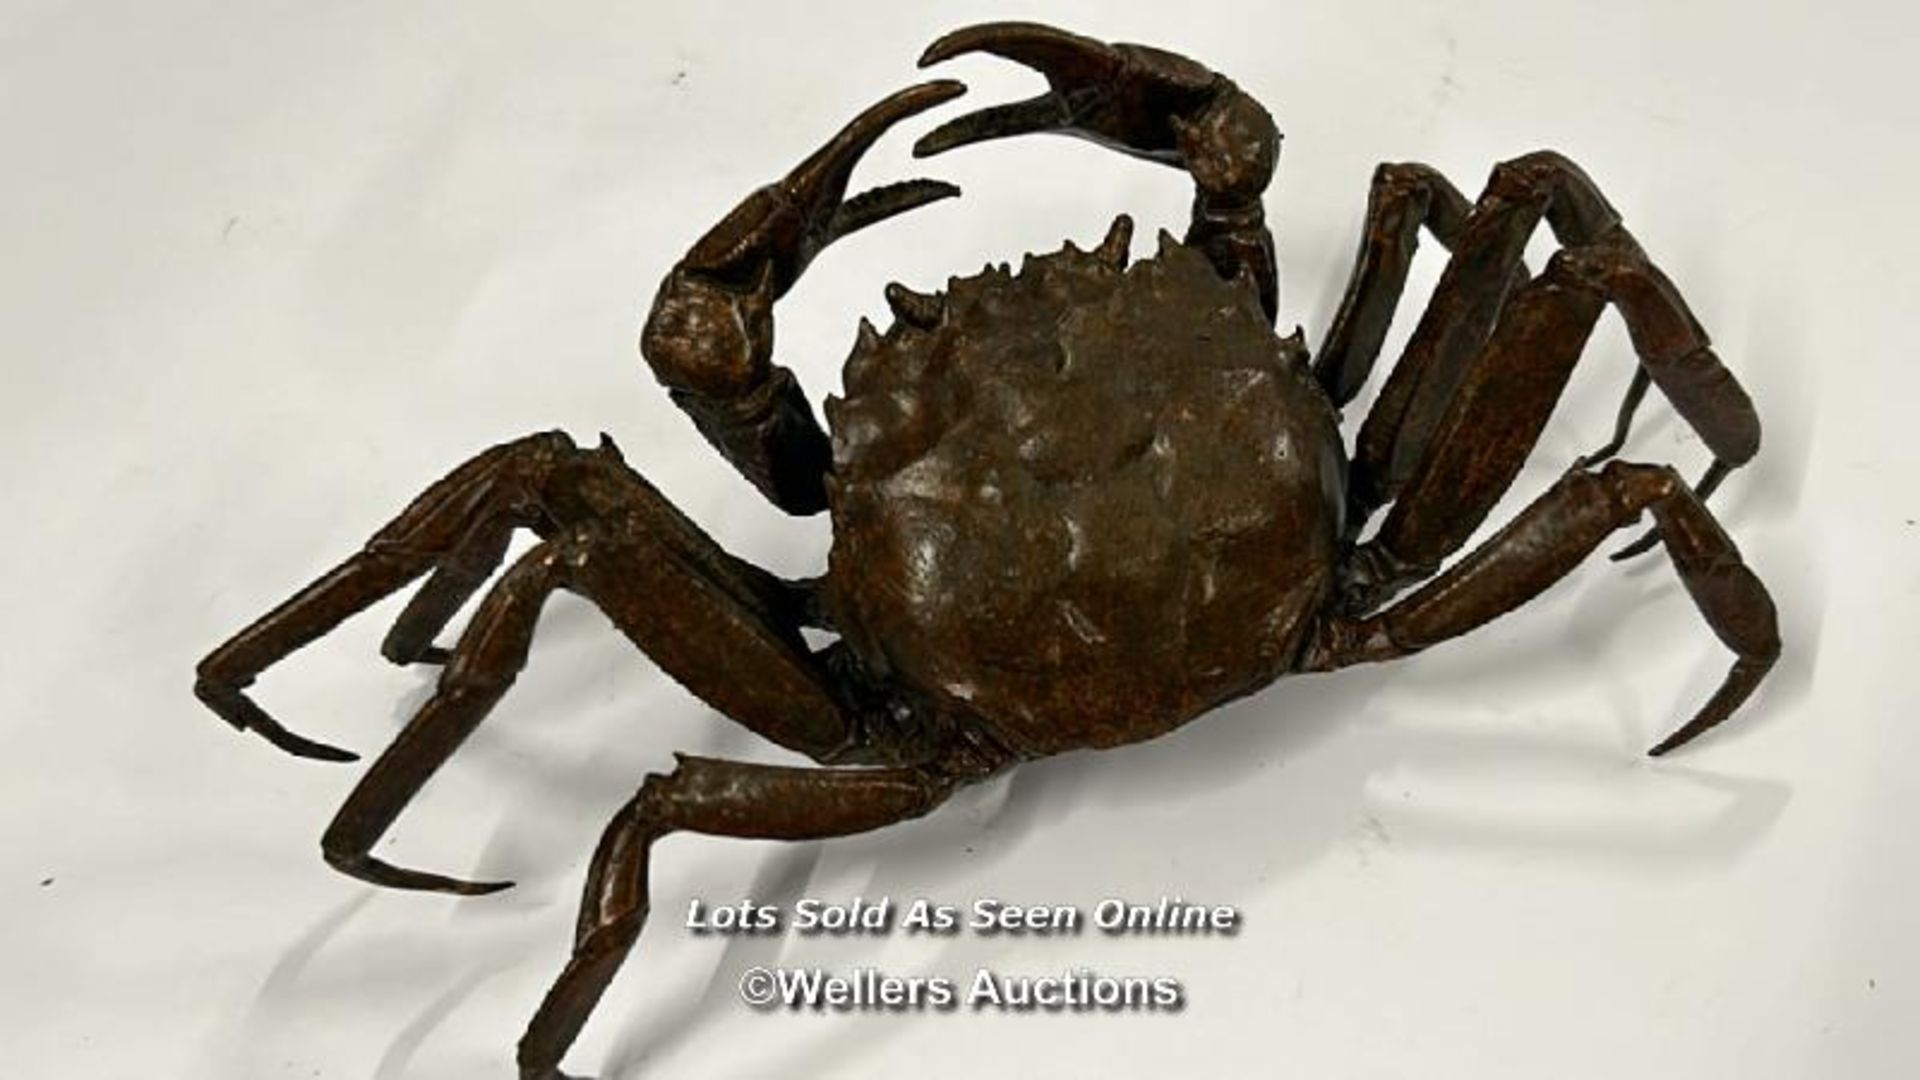 Bronzed metal decorative Crab, 15cm wide / AN13 - Image 2 of 3